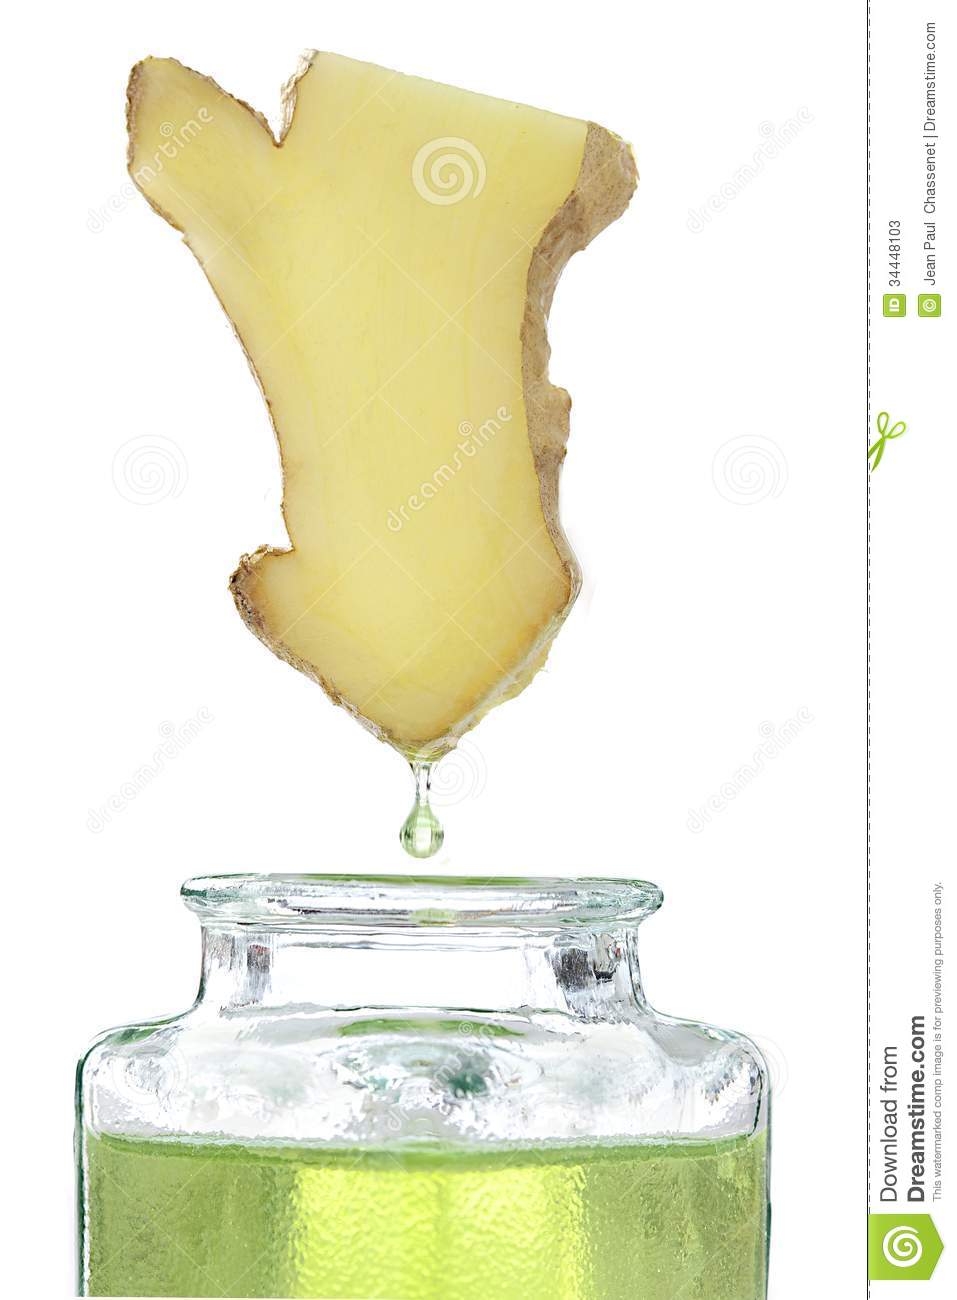 Ginger   Drop Essential Oil Falls Stock Photos   Image  34448103